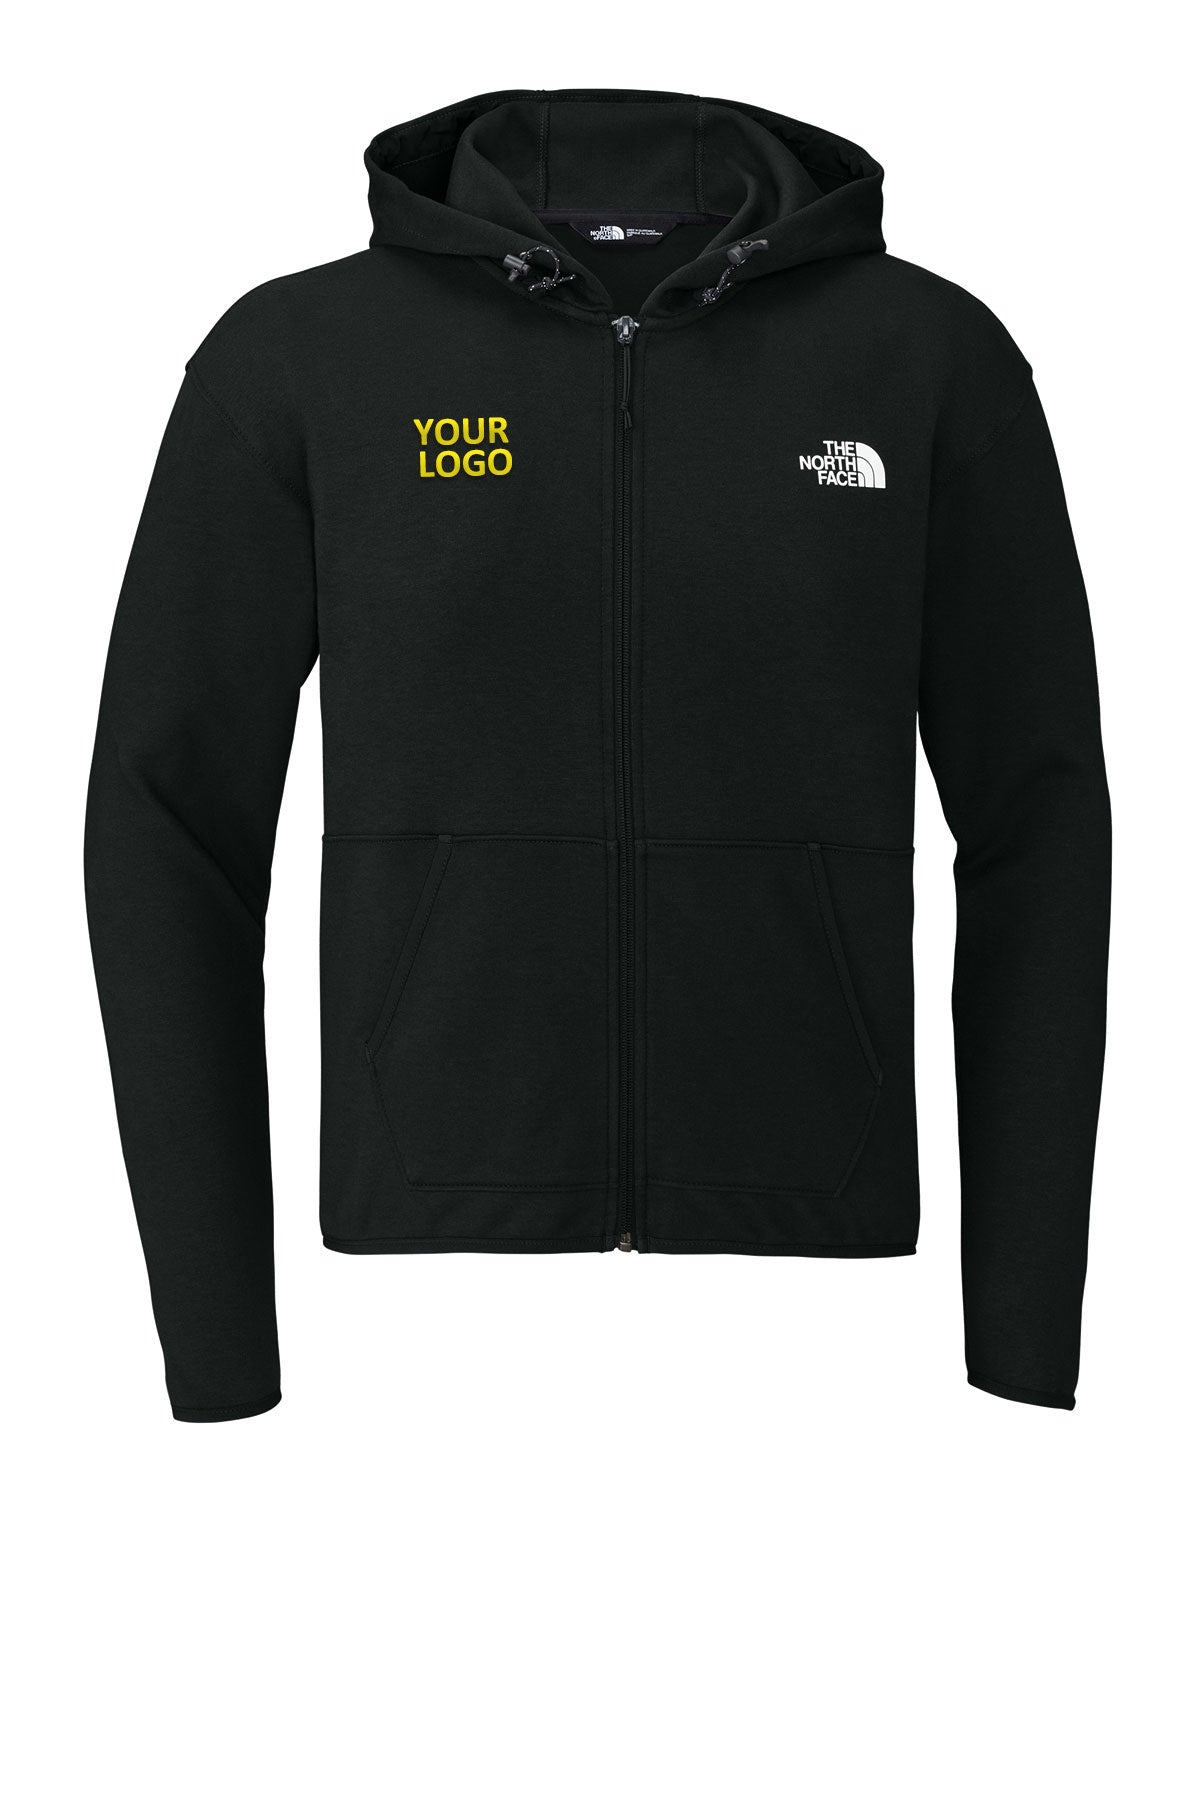 The North Face TNF Black NF0A8BUS custom logo sweatshirts embroidered